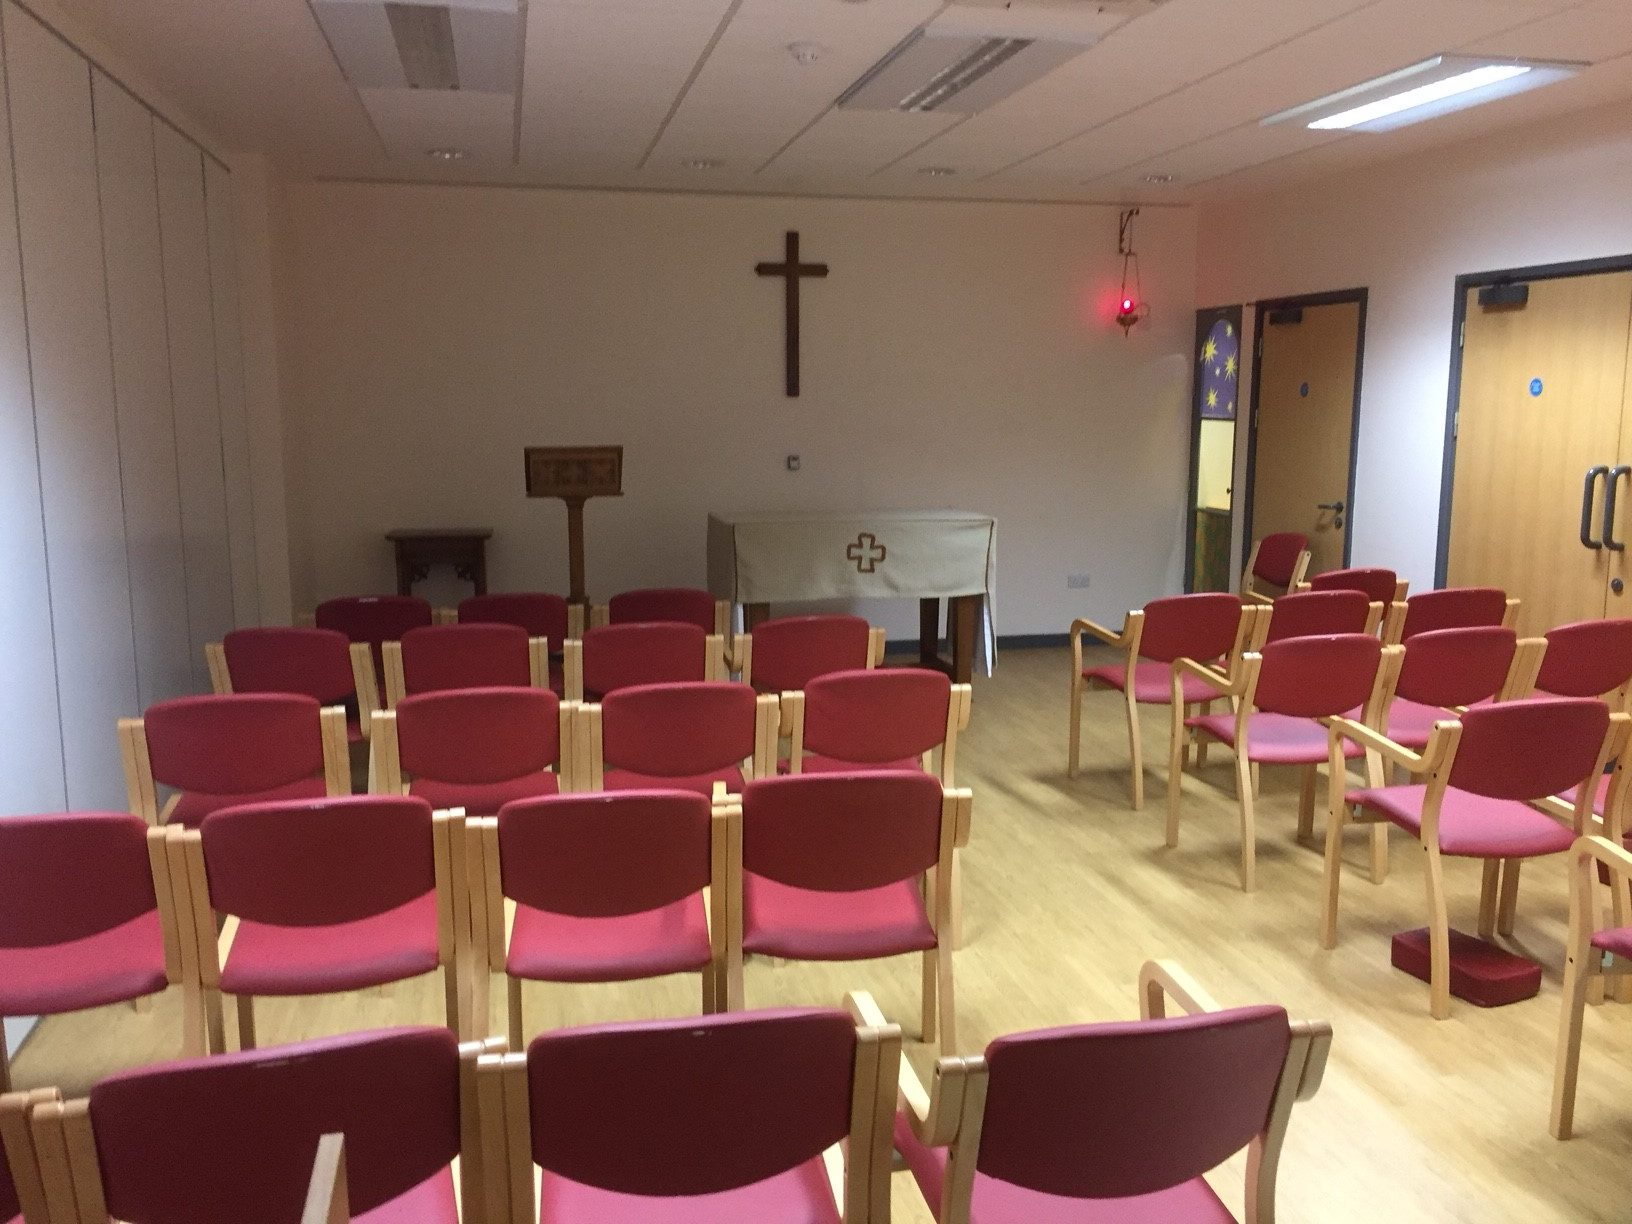 The Chapel in St George's Hospital.